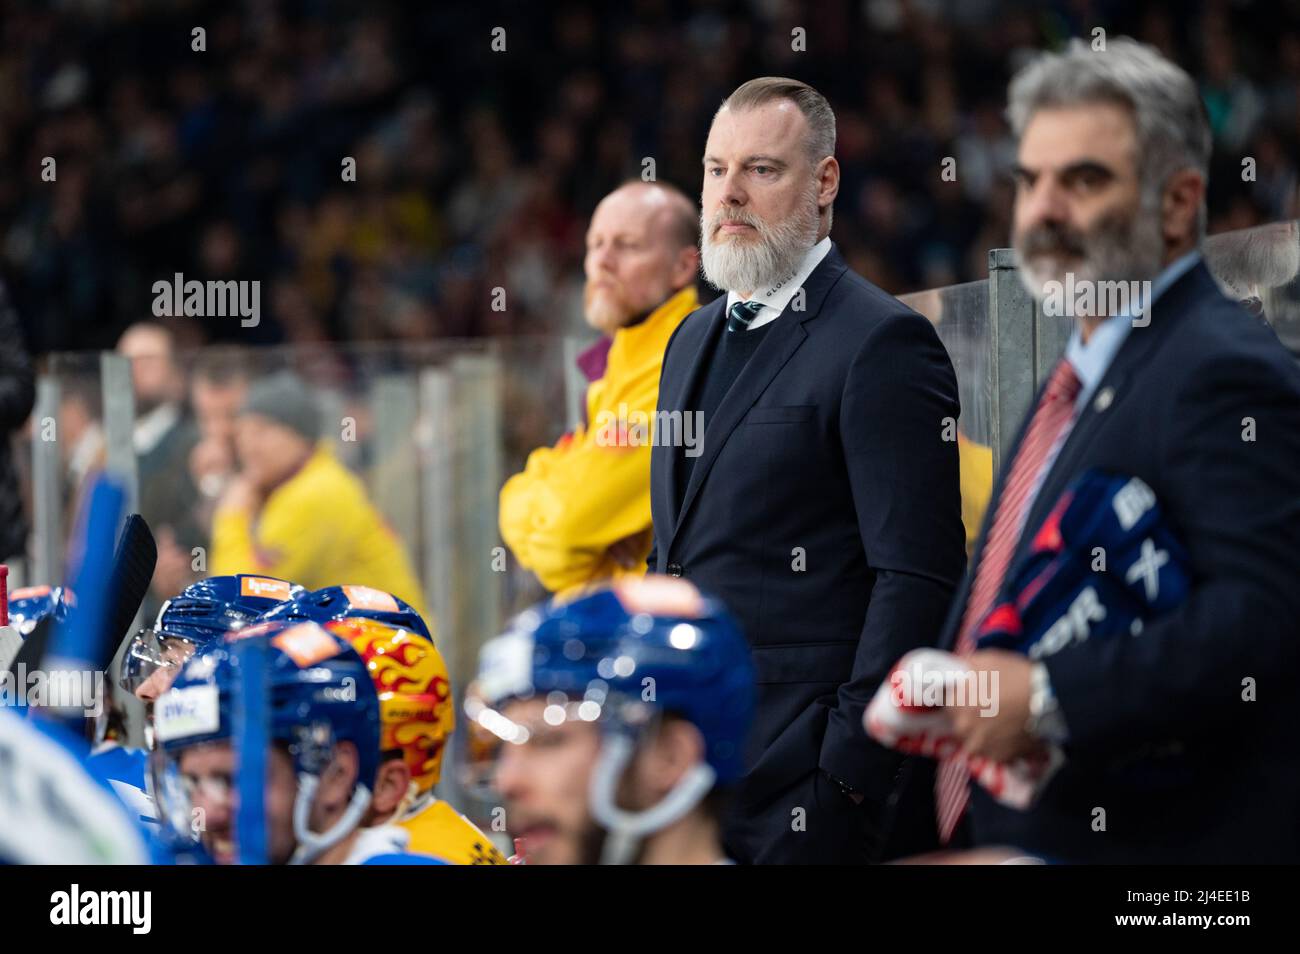 April 14, 2022, Zurich, Hallenstadion, Swiss National League: Semifinals  Game 4: ZSC Lions - Fribourg-Gotteron, #91 Denis Hollenstein (ZSC) shooting  at goal. (Photo by Markus Aeschimann/Just Pictures/Sipa USA Stock Photo -  Alamy